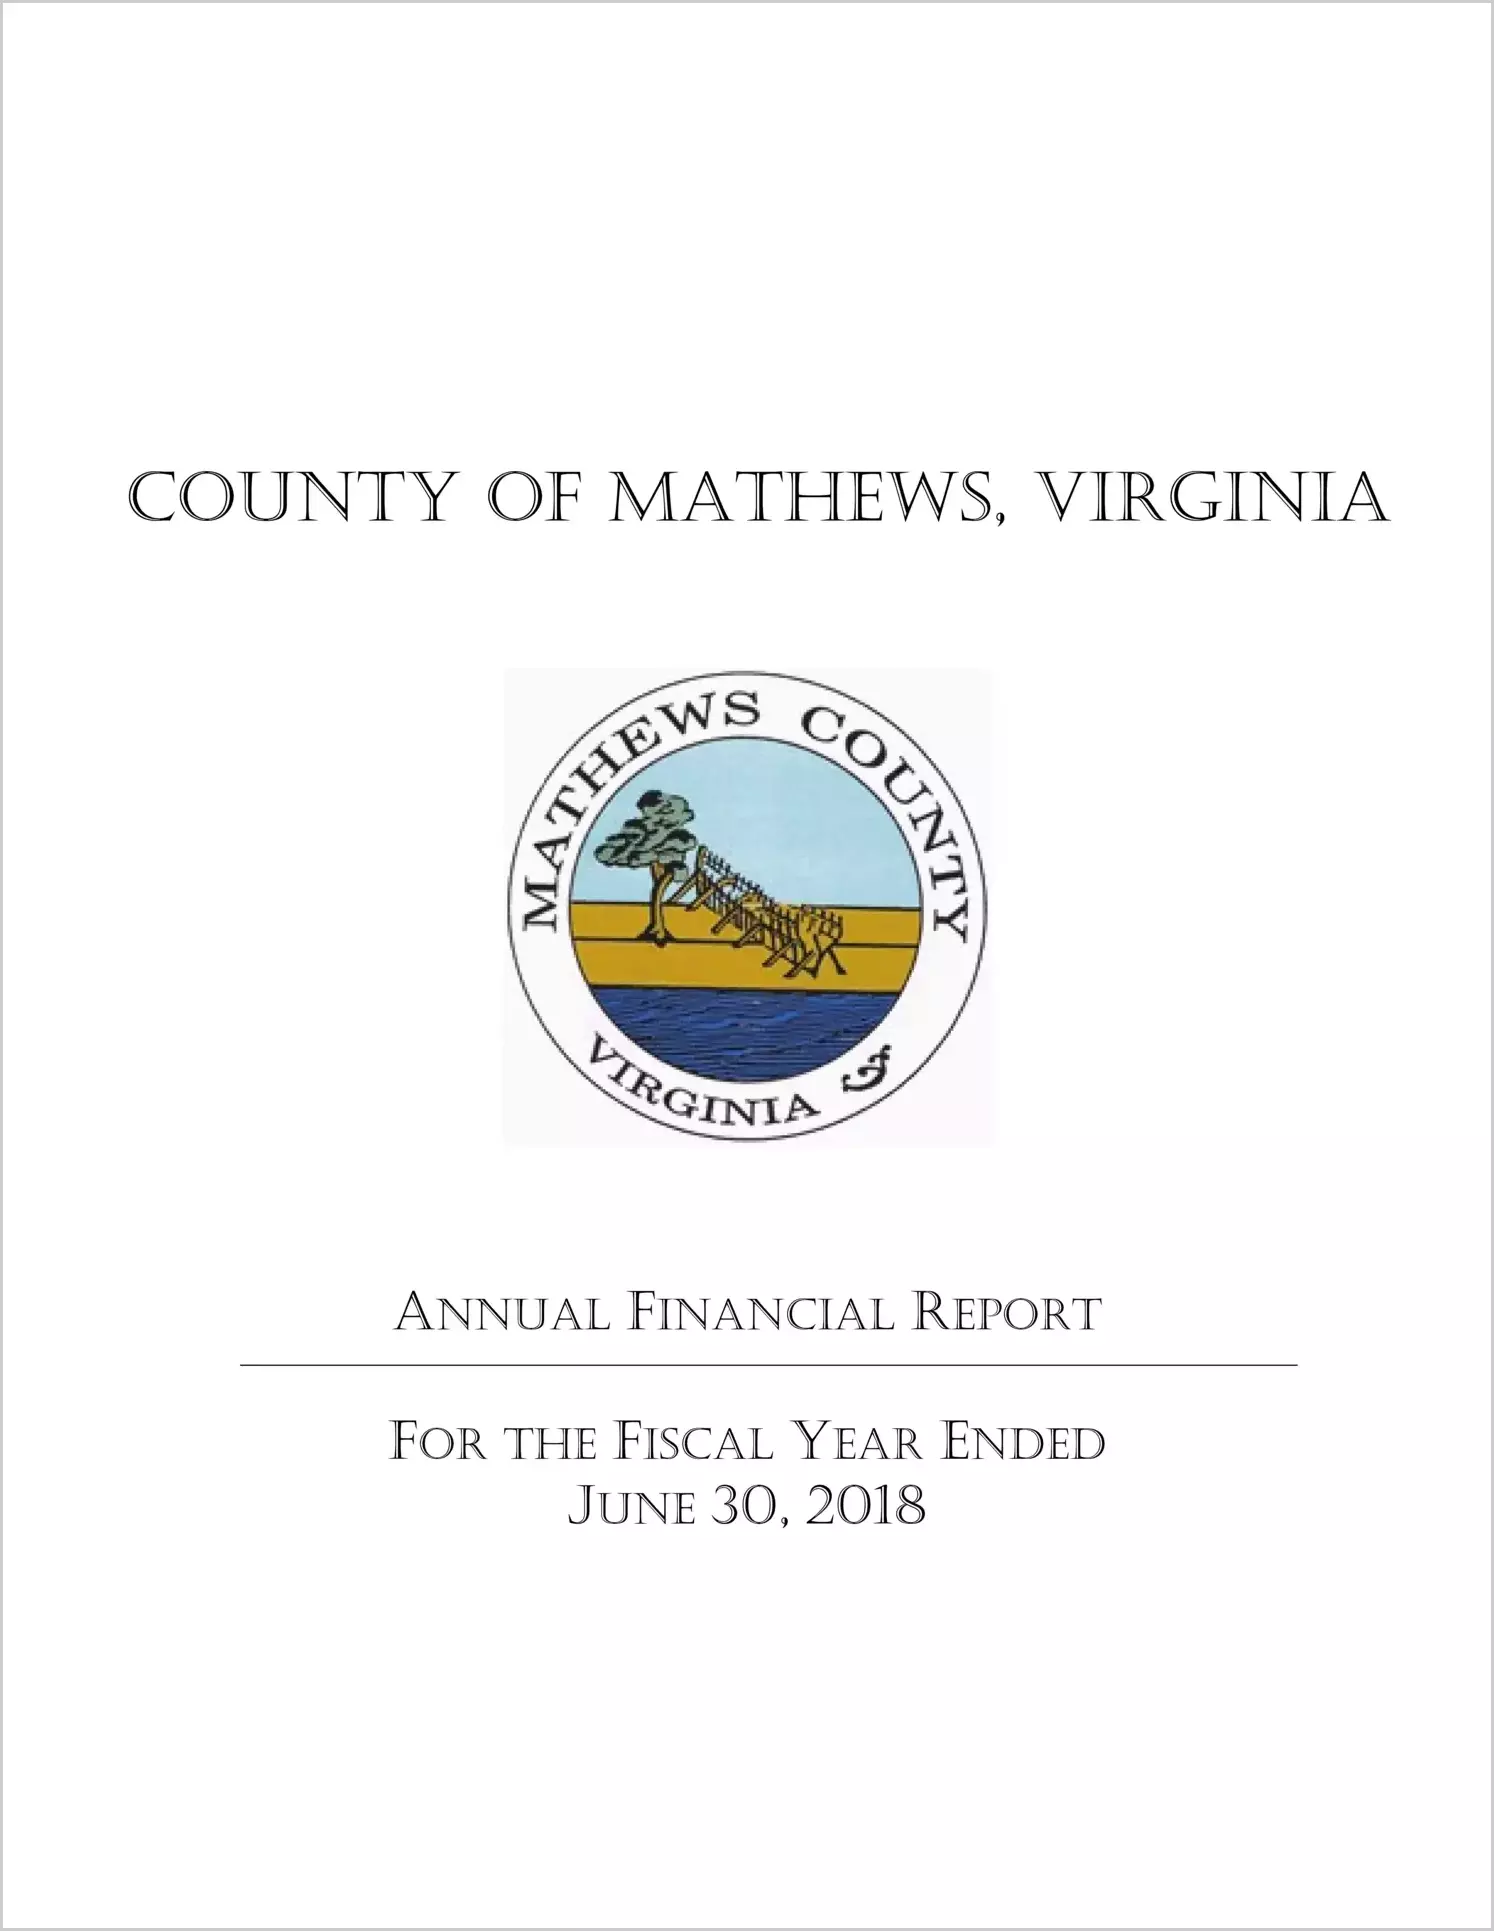 2018 Annual Financial Report for County of Mathews